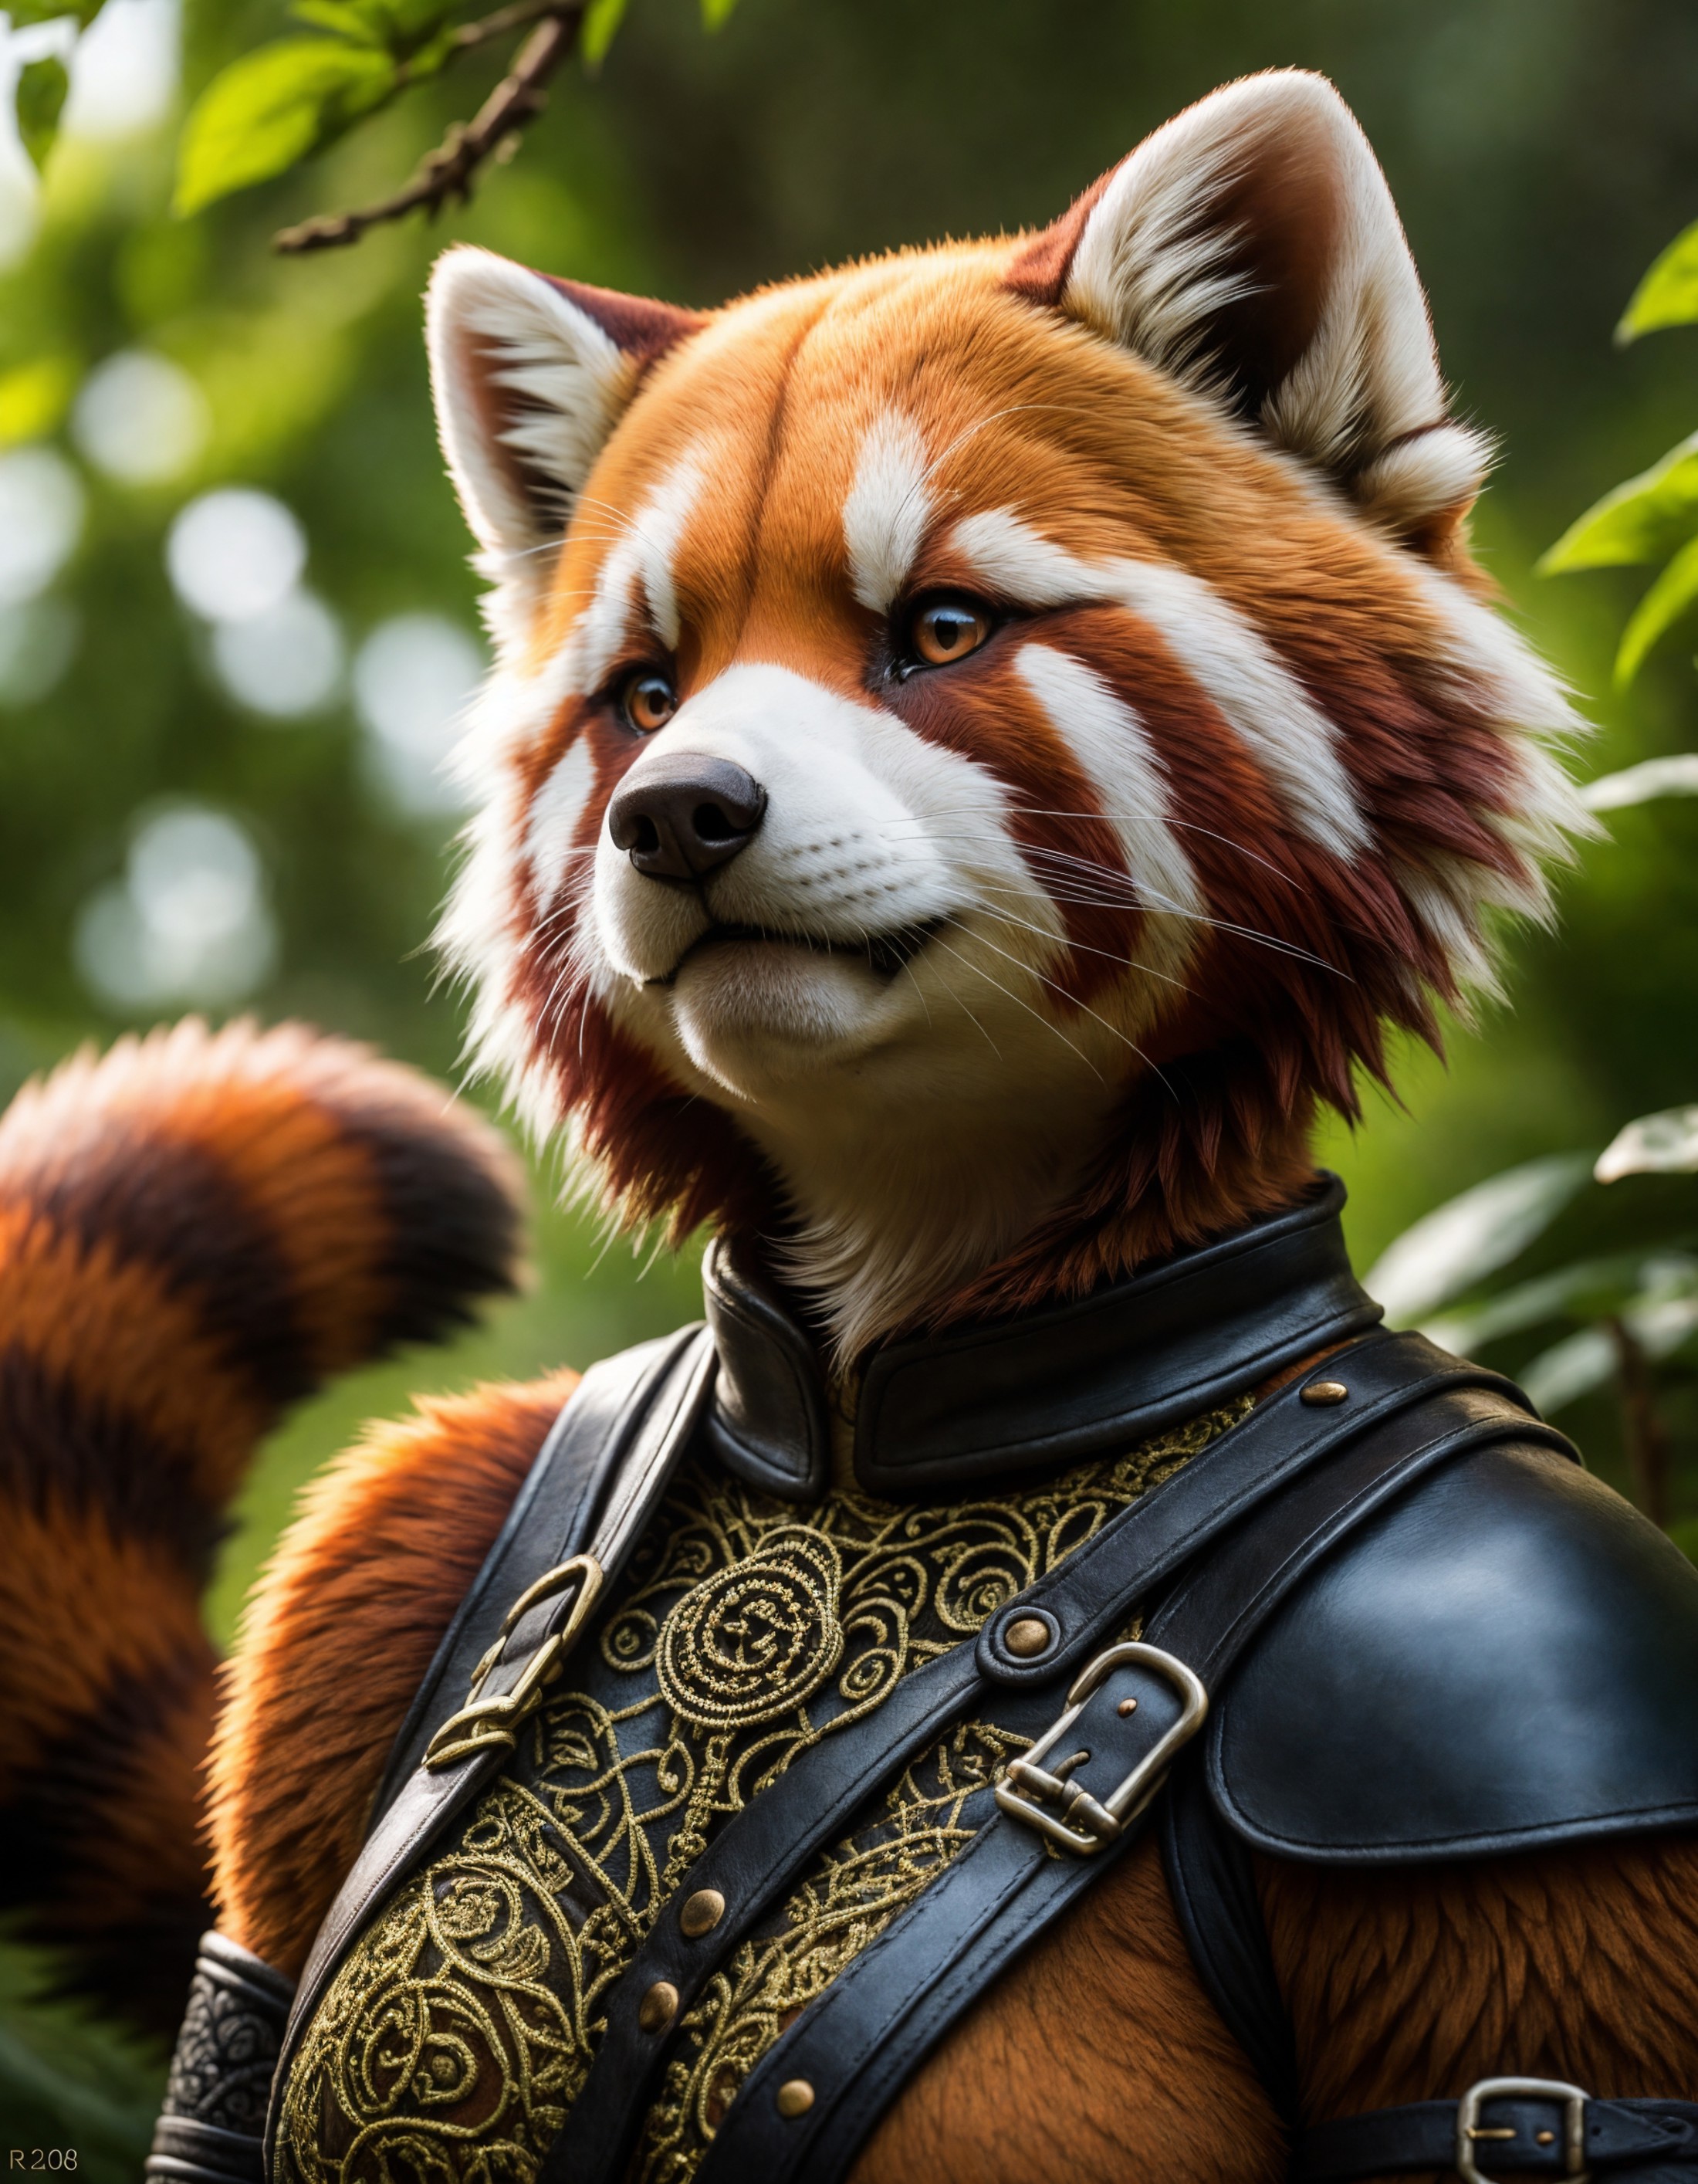 (a anthro red panda_adventurer), (detailed leather outfit),holding sword ,searching for treasure, epic overgrown temple ru...